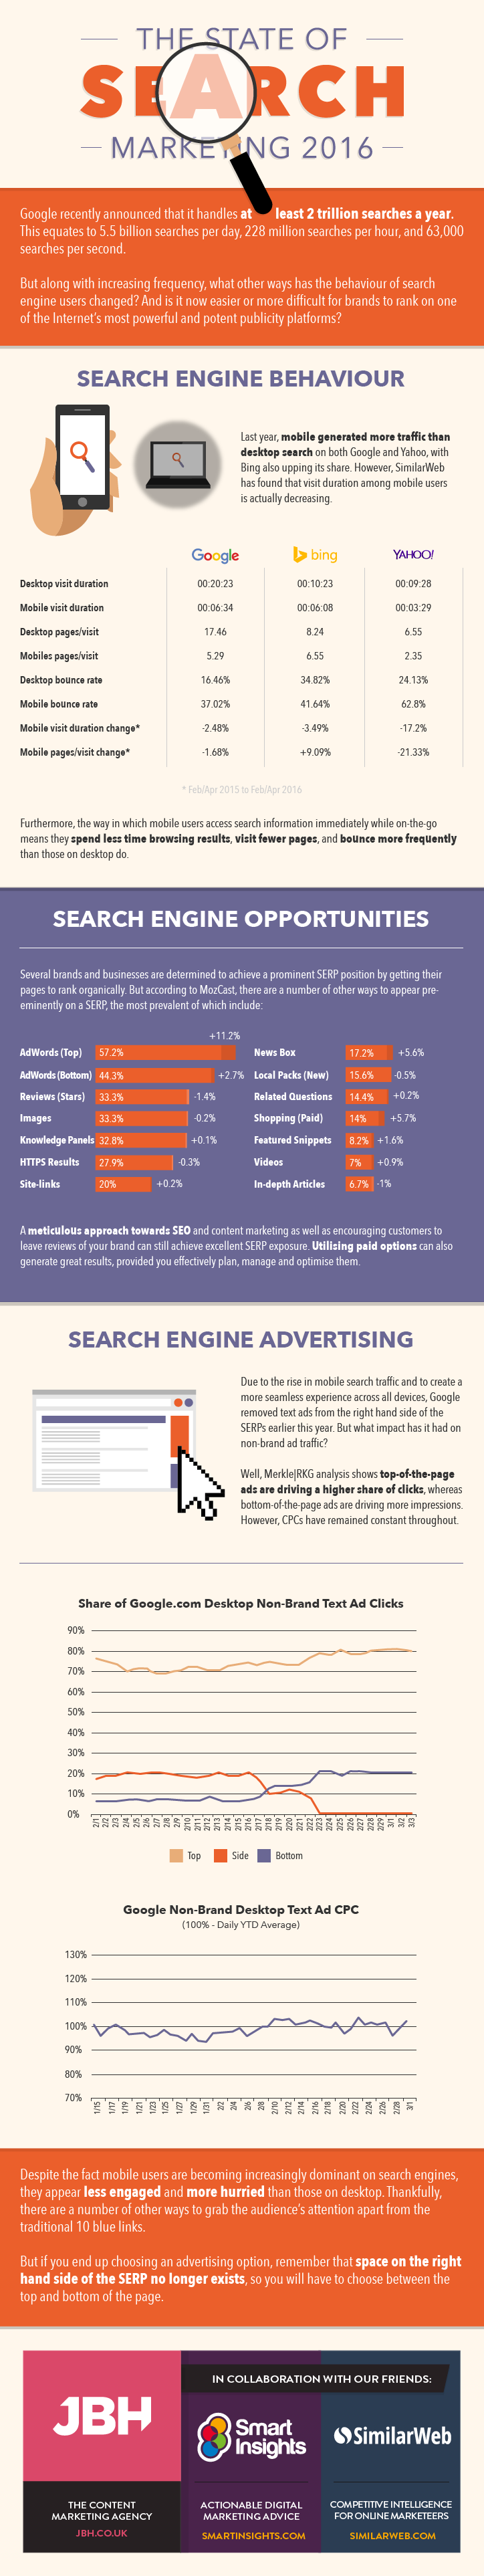 How the behavior of search users is evolving [Infographic]